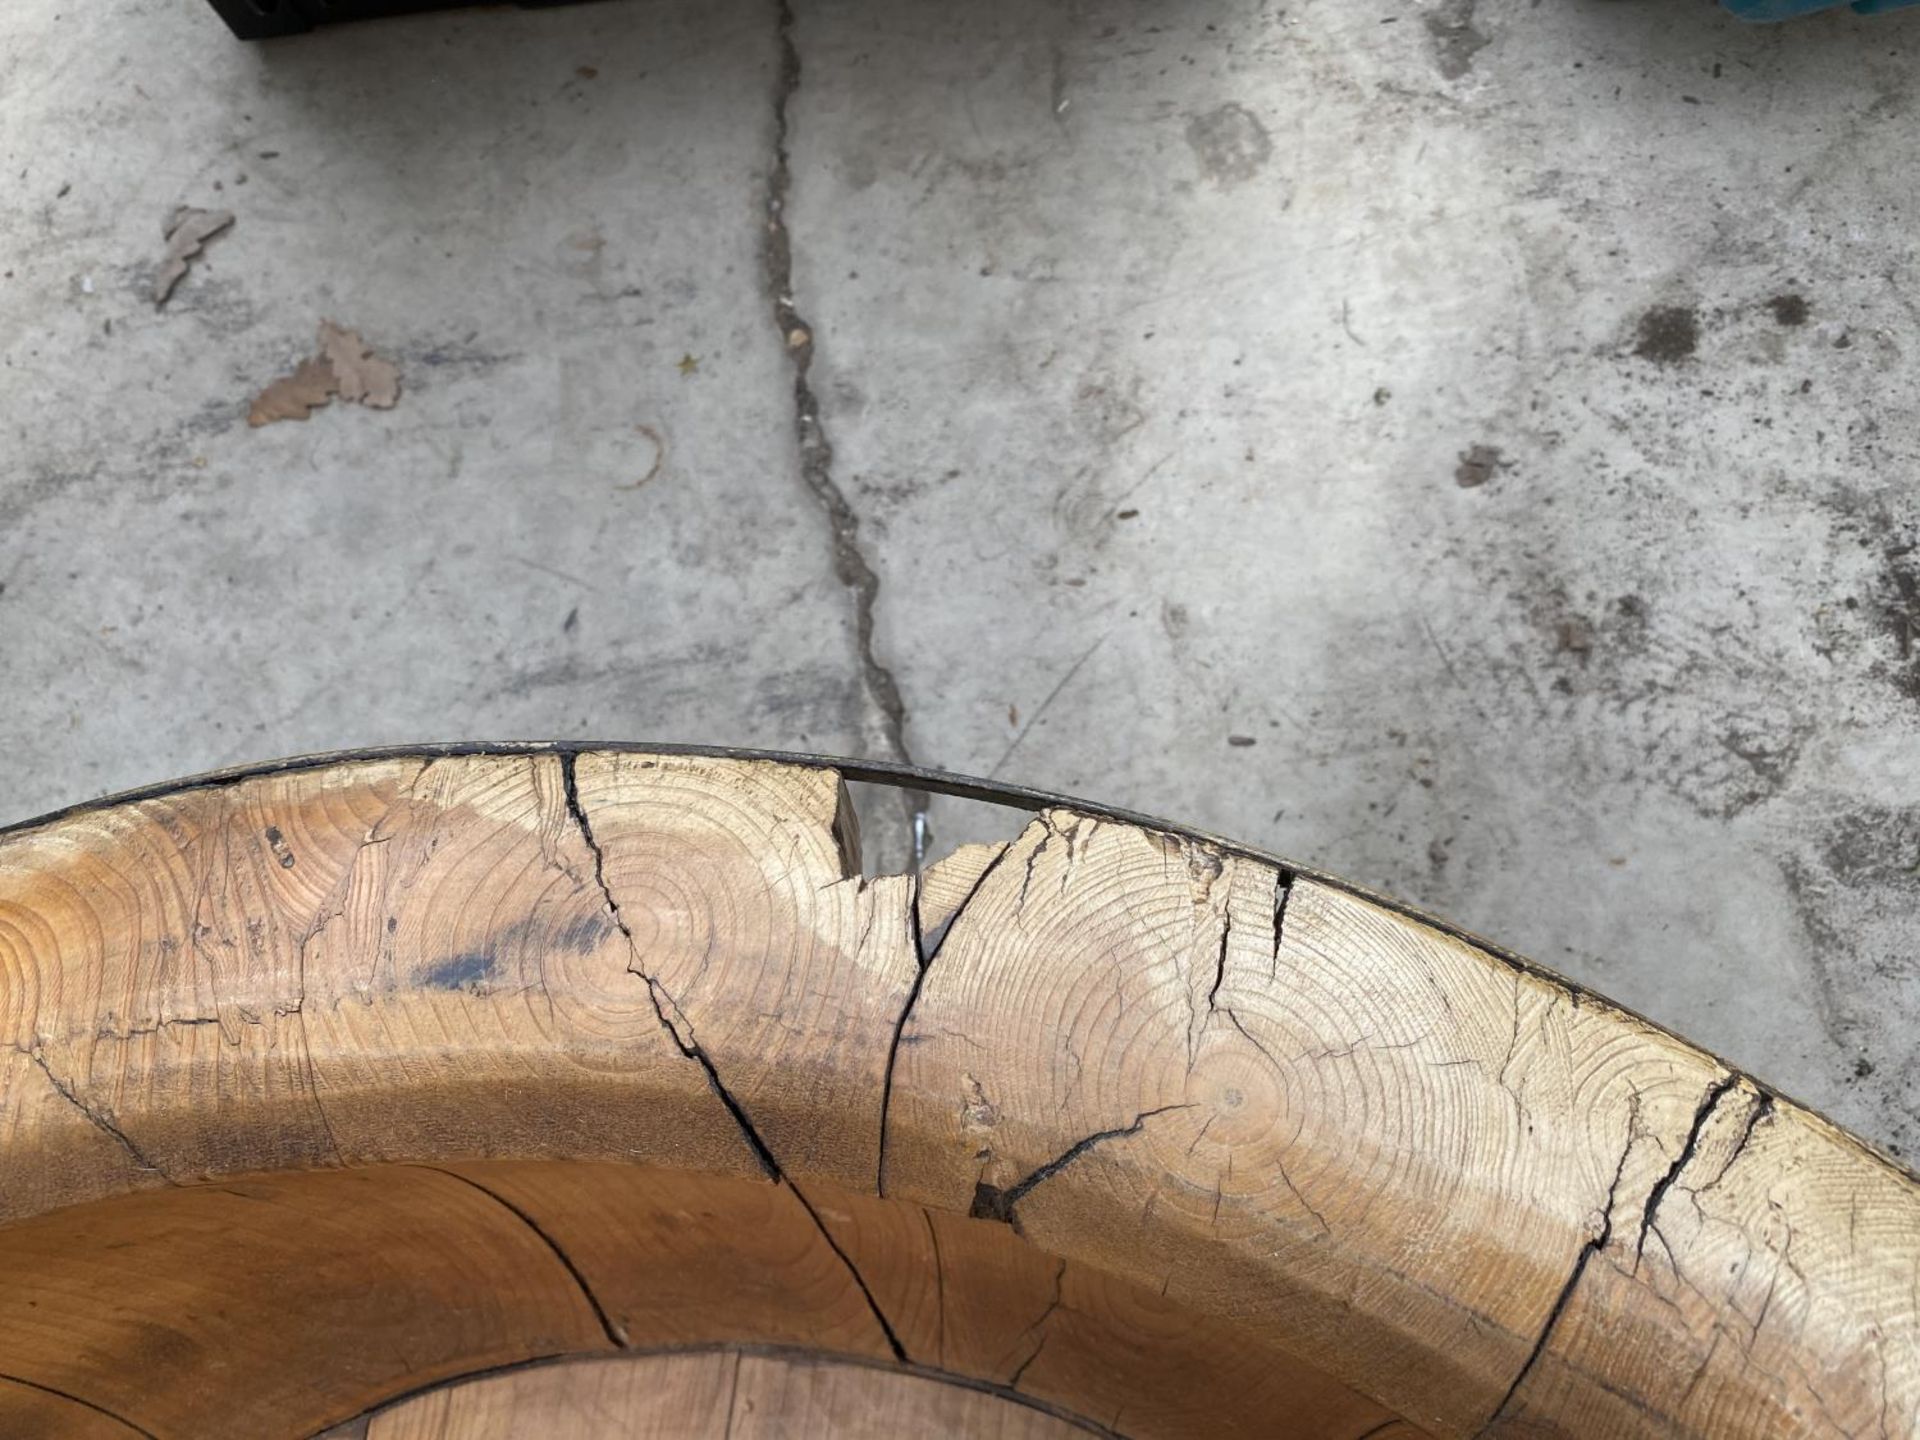 A LARGE WOODEN BOWL WITH METAL BANDING - Image 3 of 5